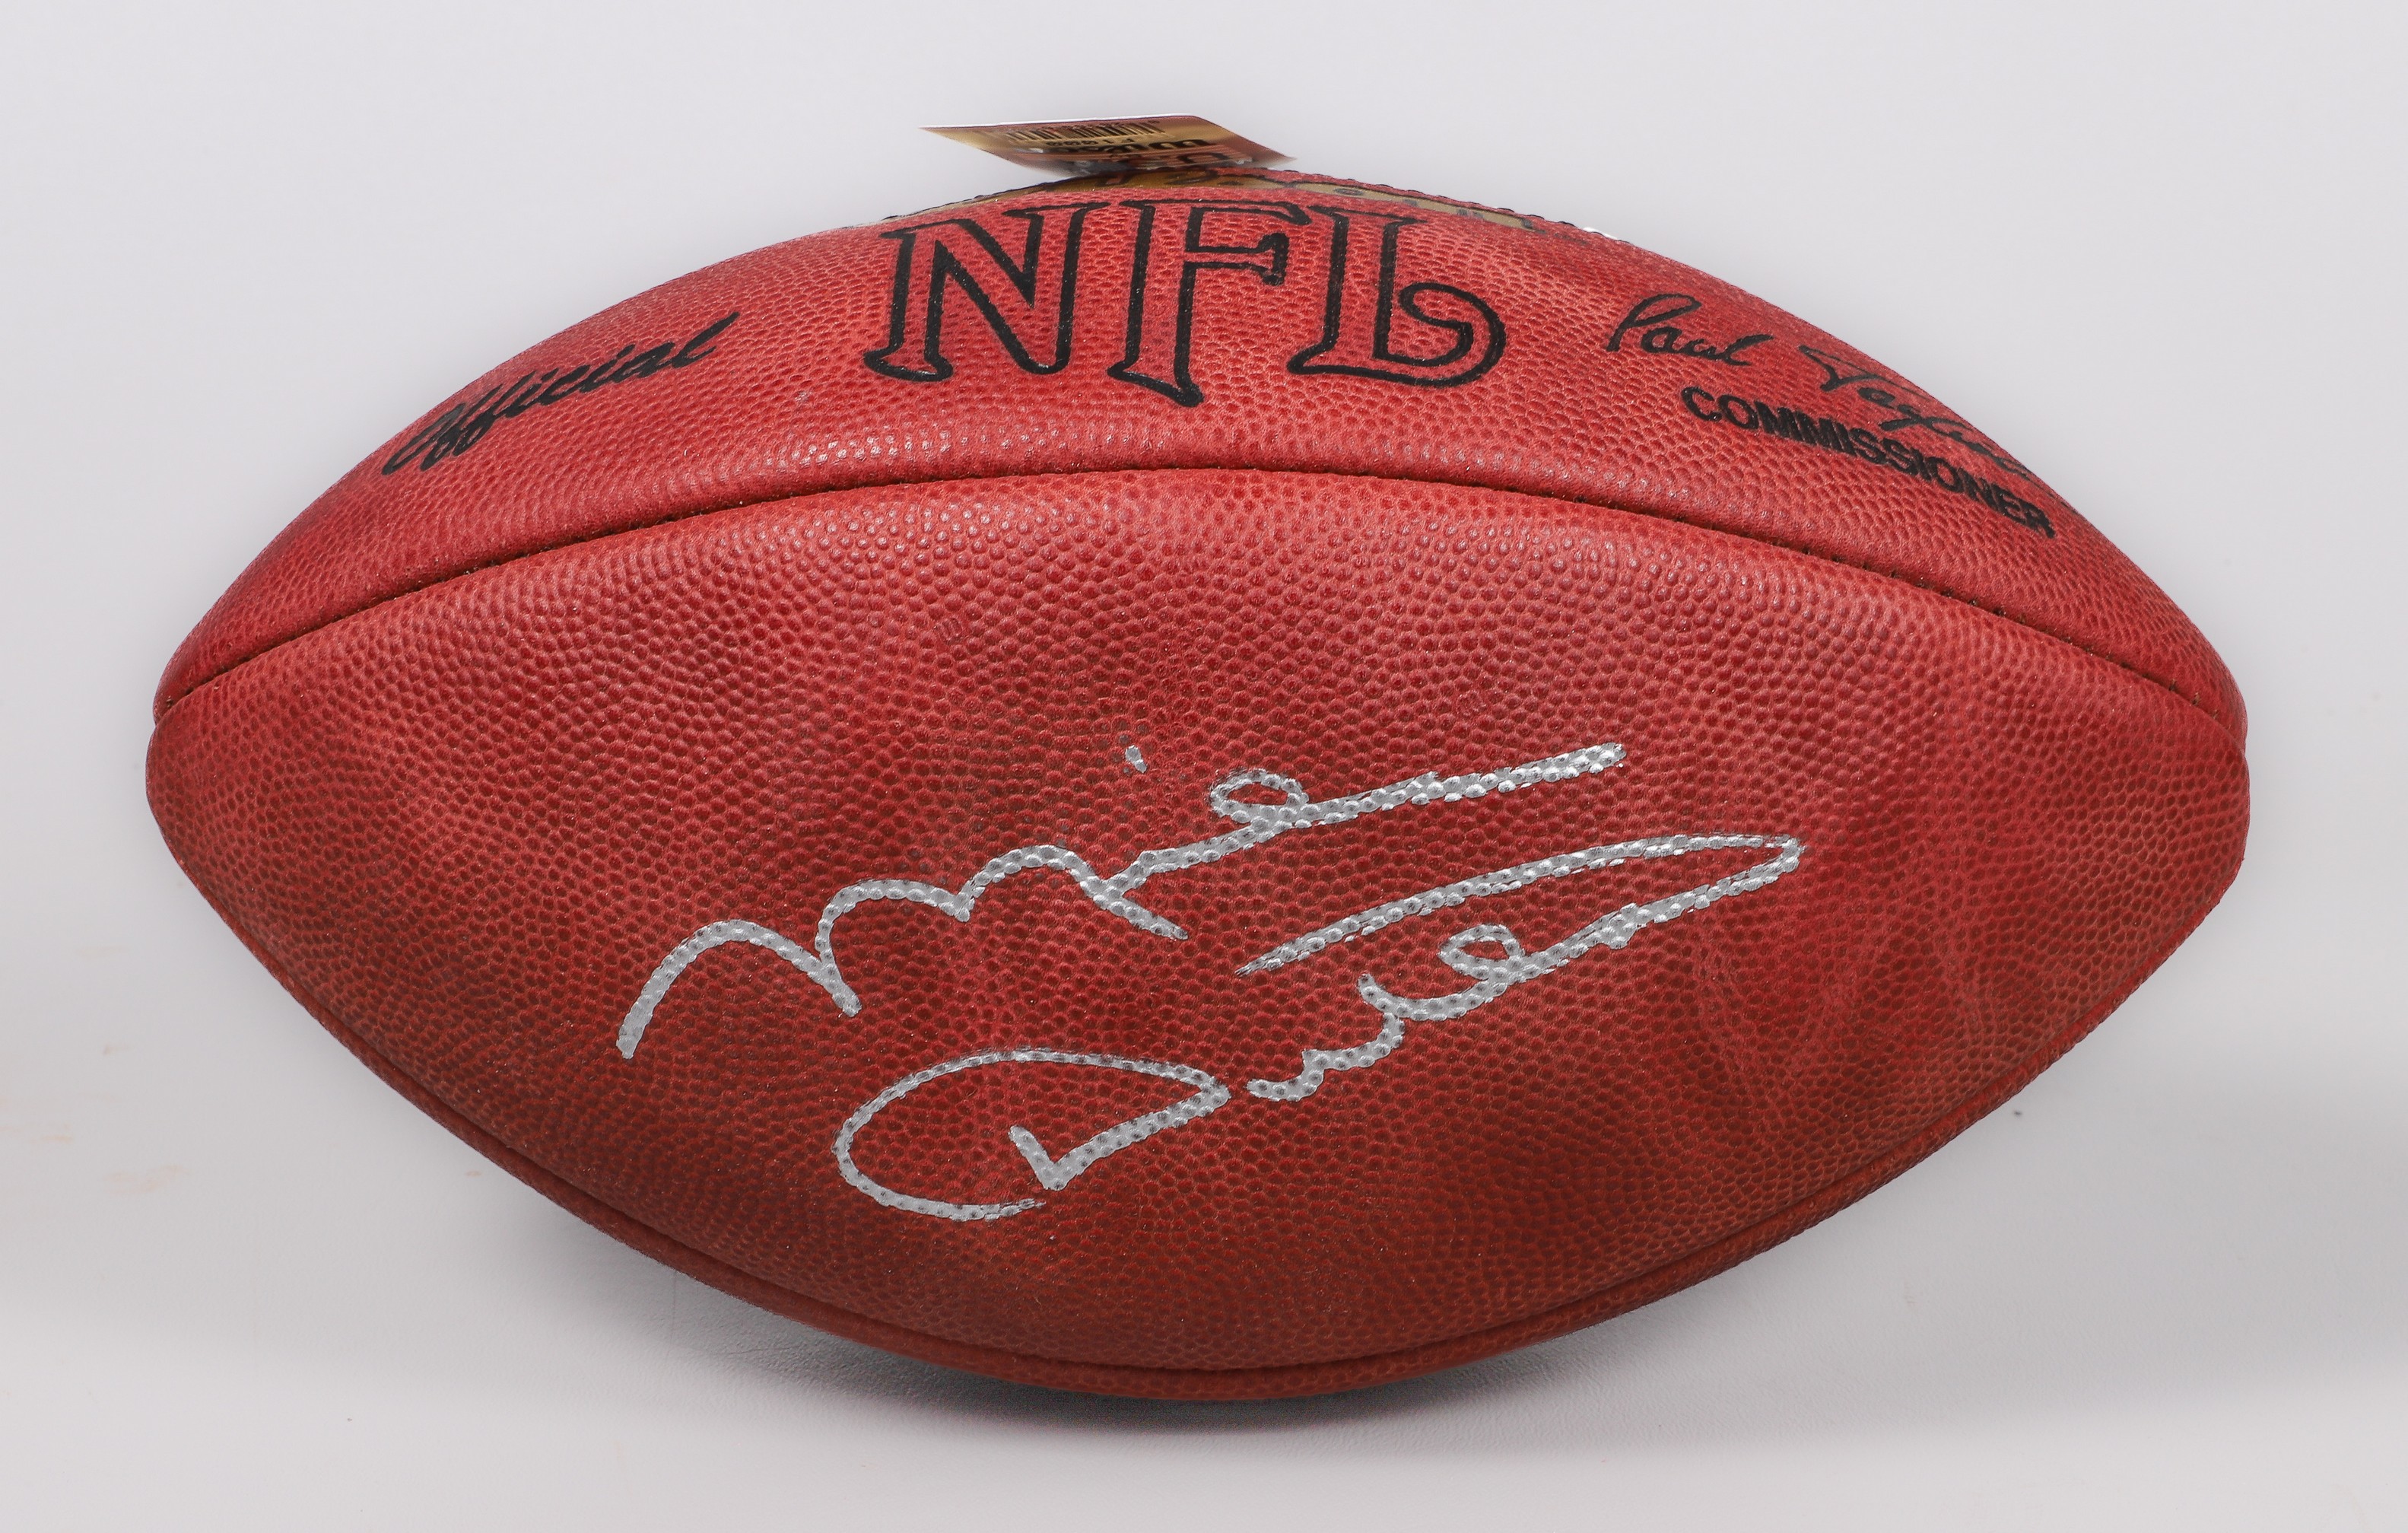 Wilson NFL football, signed in